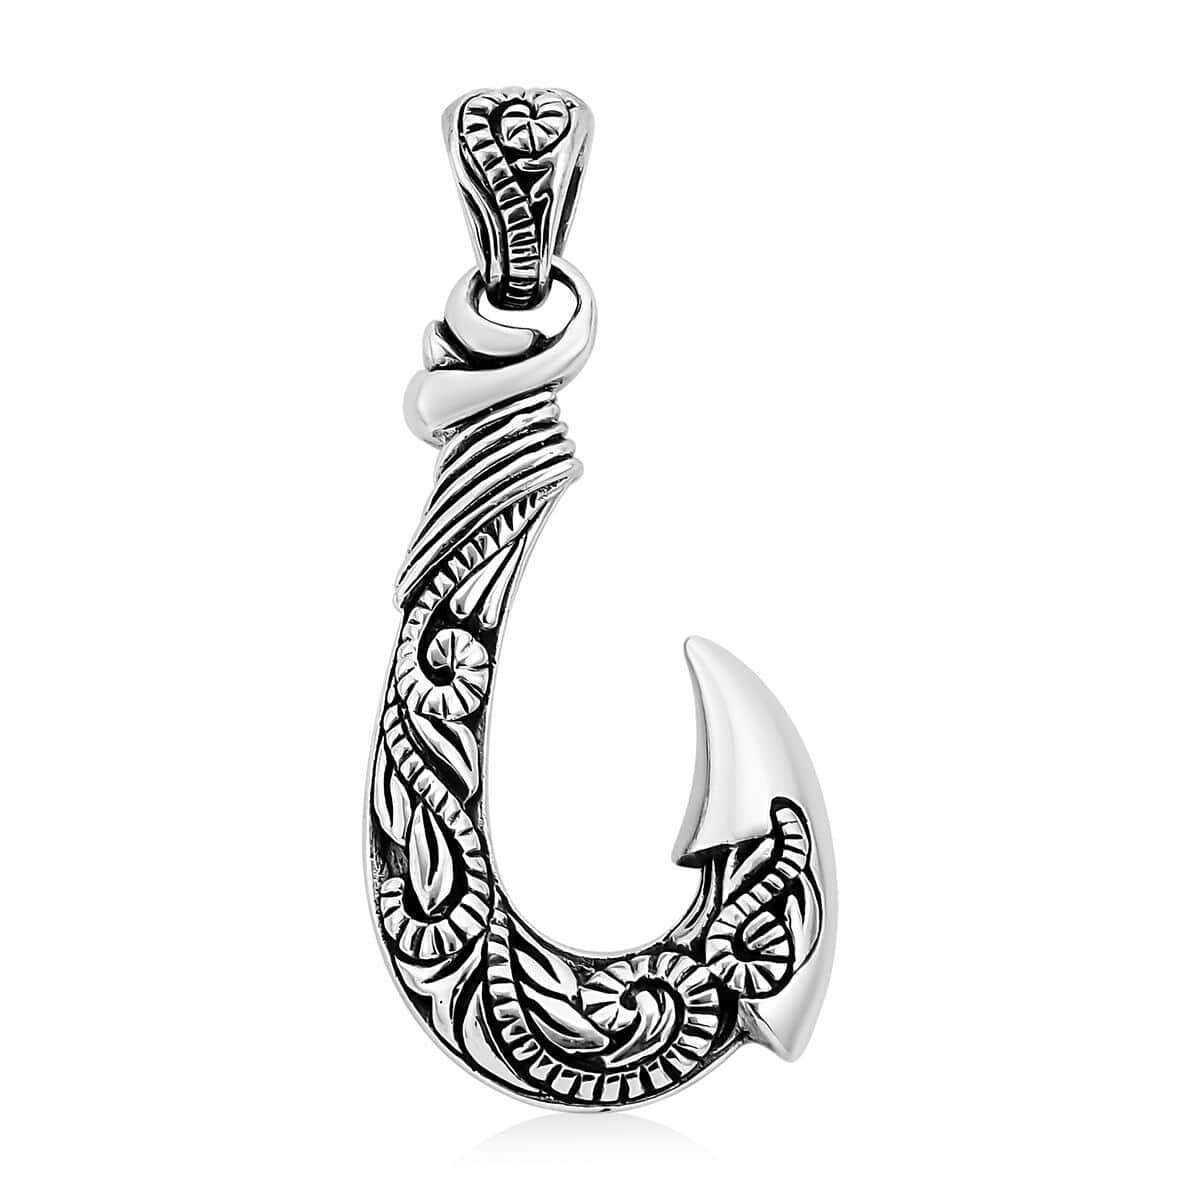 Bali Legacy Sterling Silver Fishhook Pendant, Silver Pendant, Aquatic Themed Pendant, Silver Jewelry, Gifts for Her, Birthday Gift 11.40 Grams , Shop